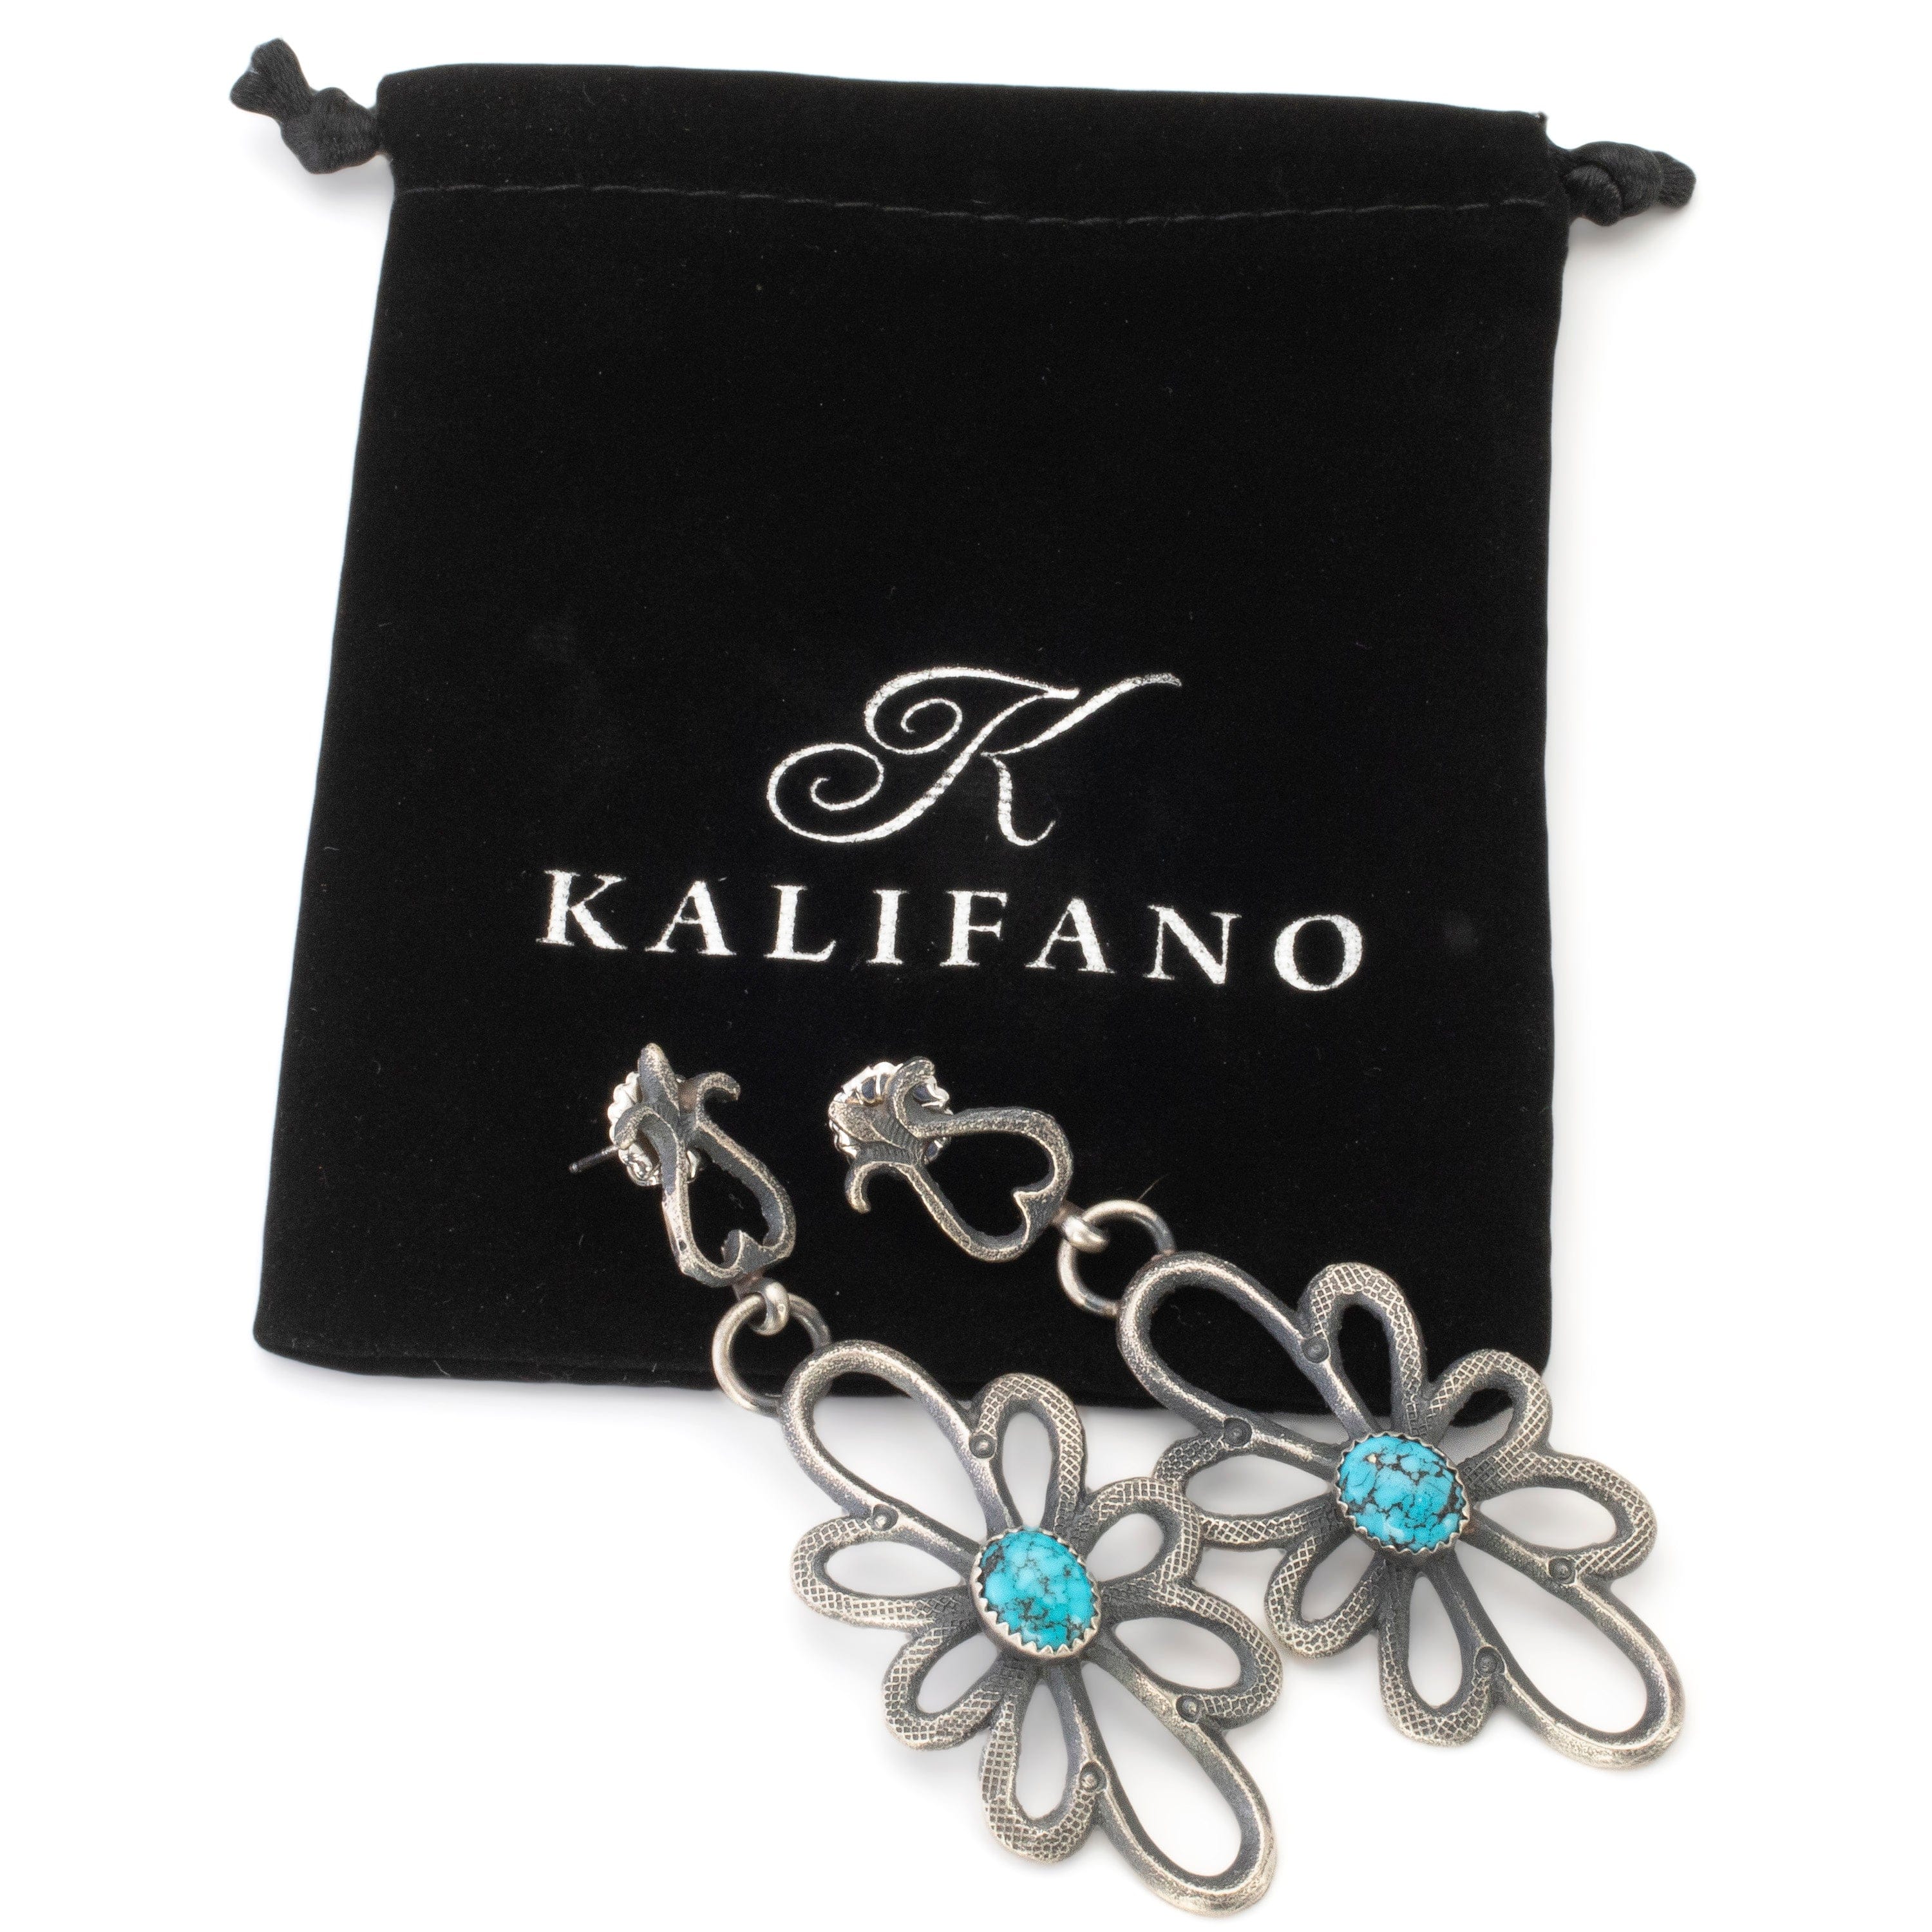 Kalifano Native American Jewelry Eva Billah Navajo Prince Turquoise USA Native American Made 925 Sterling Silver Dangly Flower Earrings with Stud Backing NAE1500.005